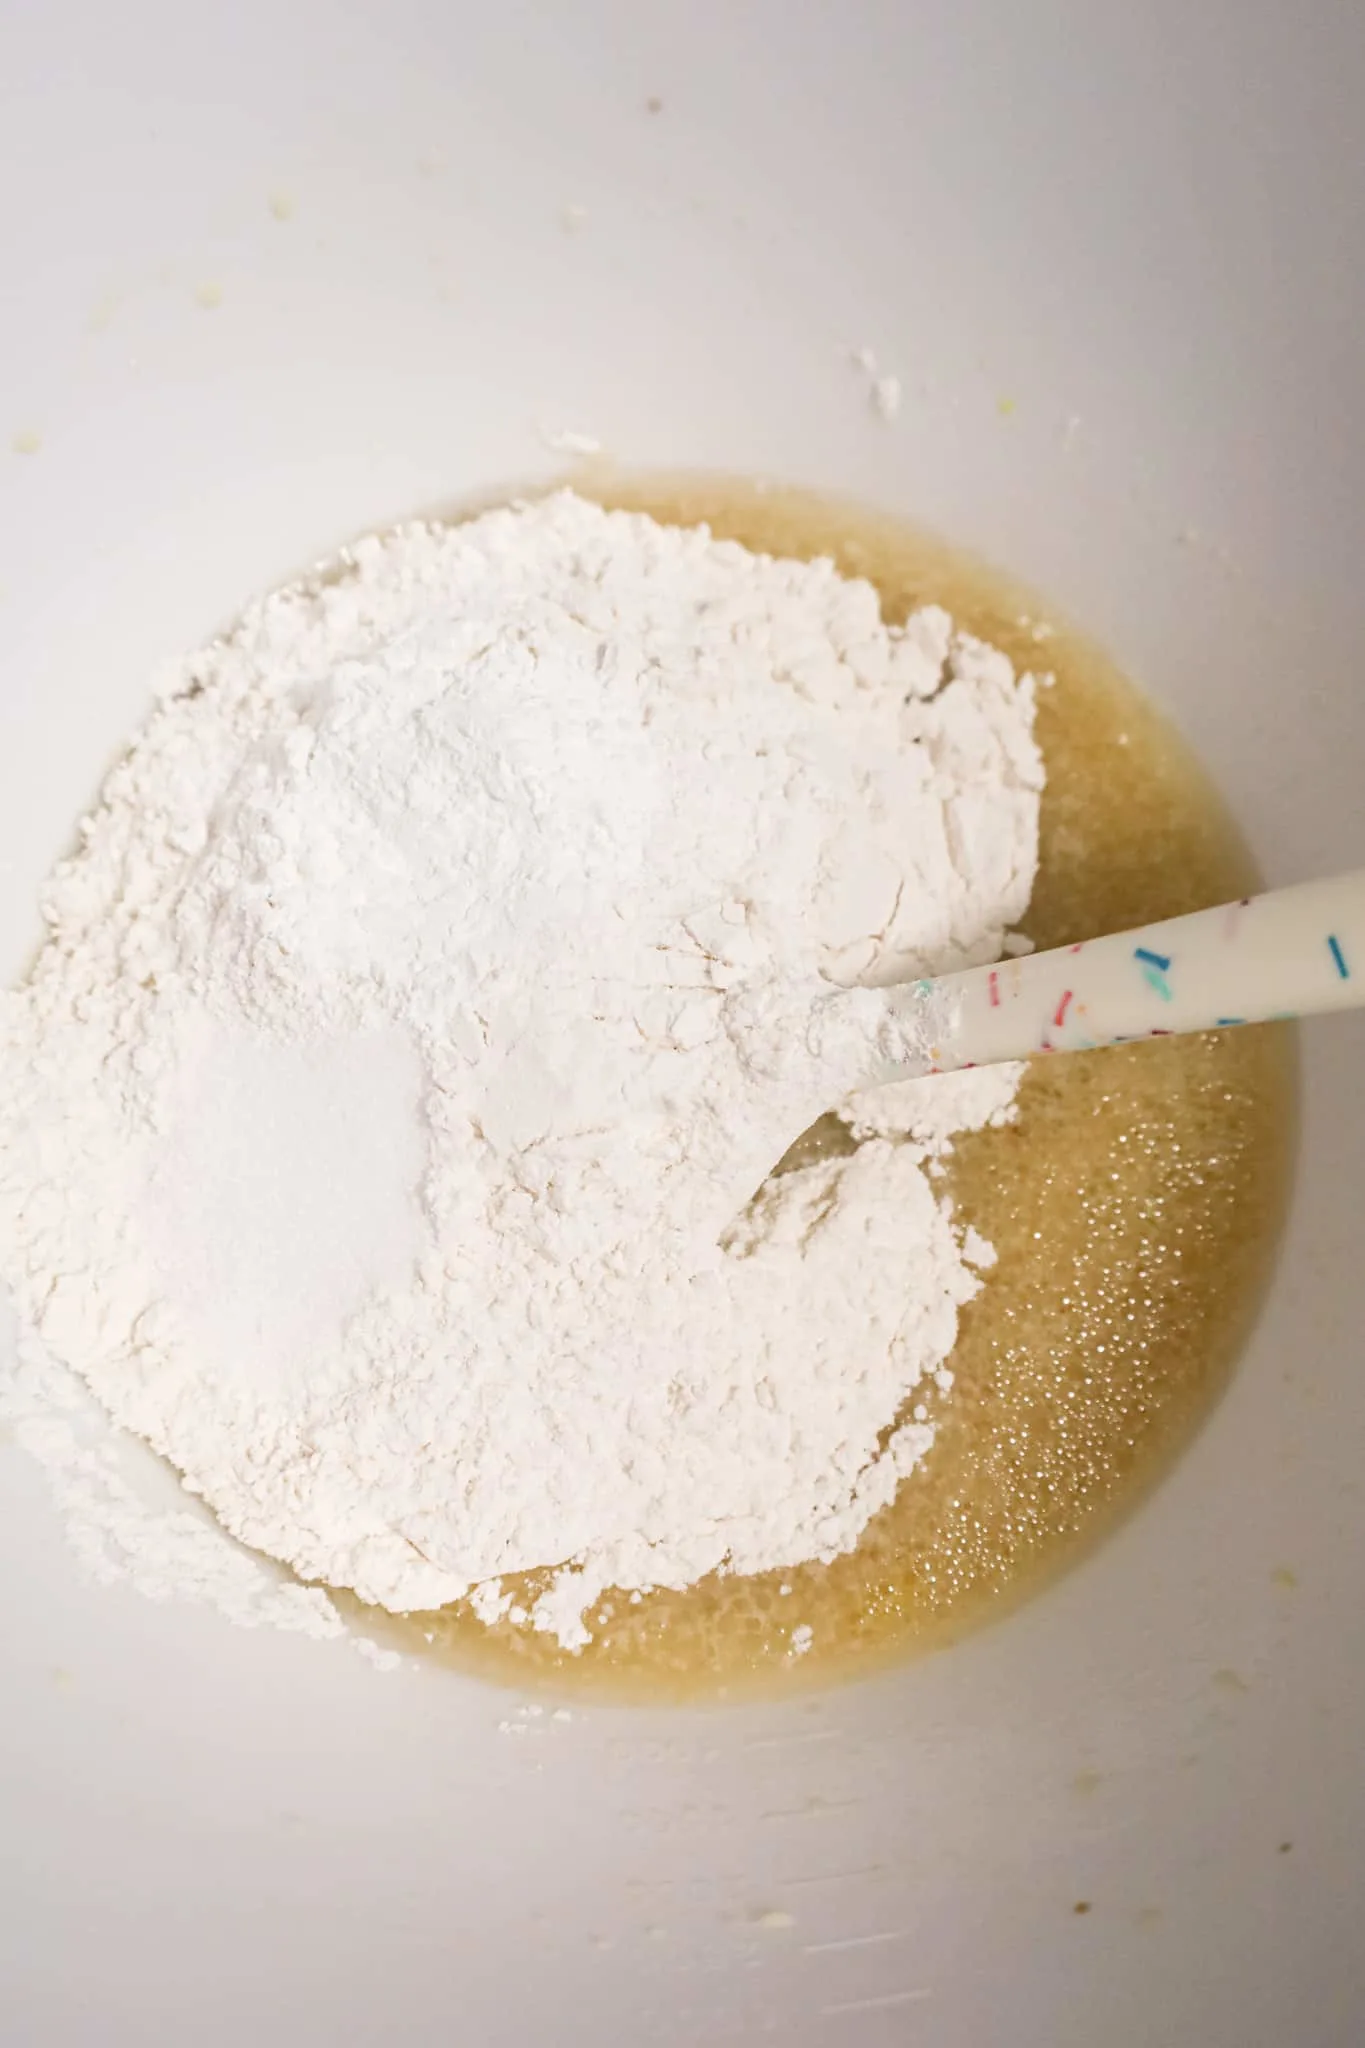 baking powder and flour on top of oil and milk mixture in a mixing bowl